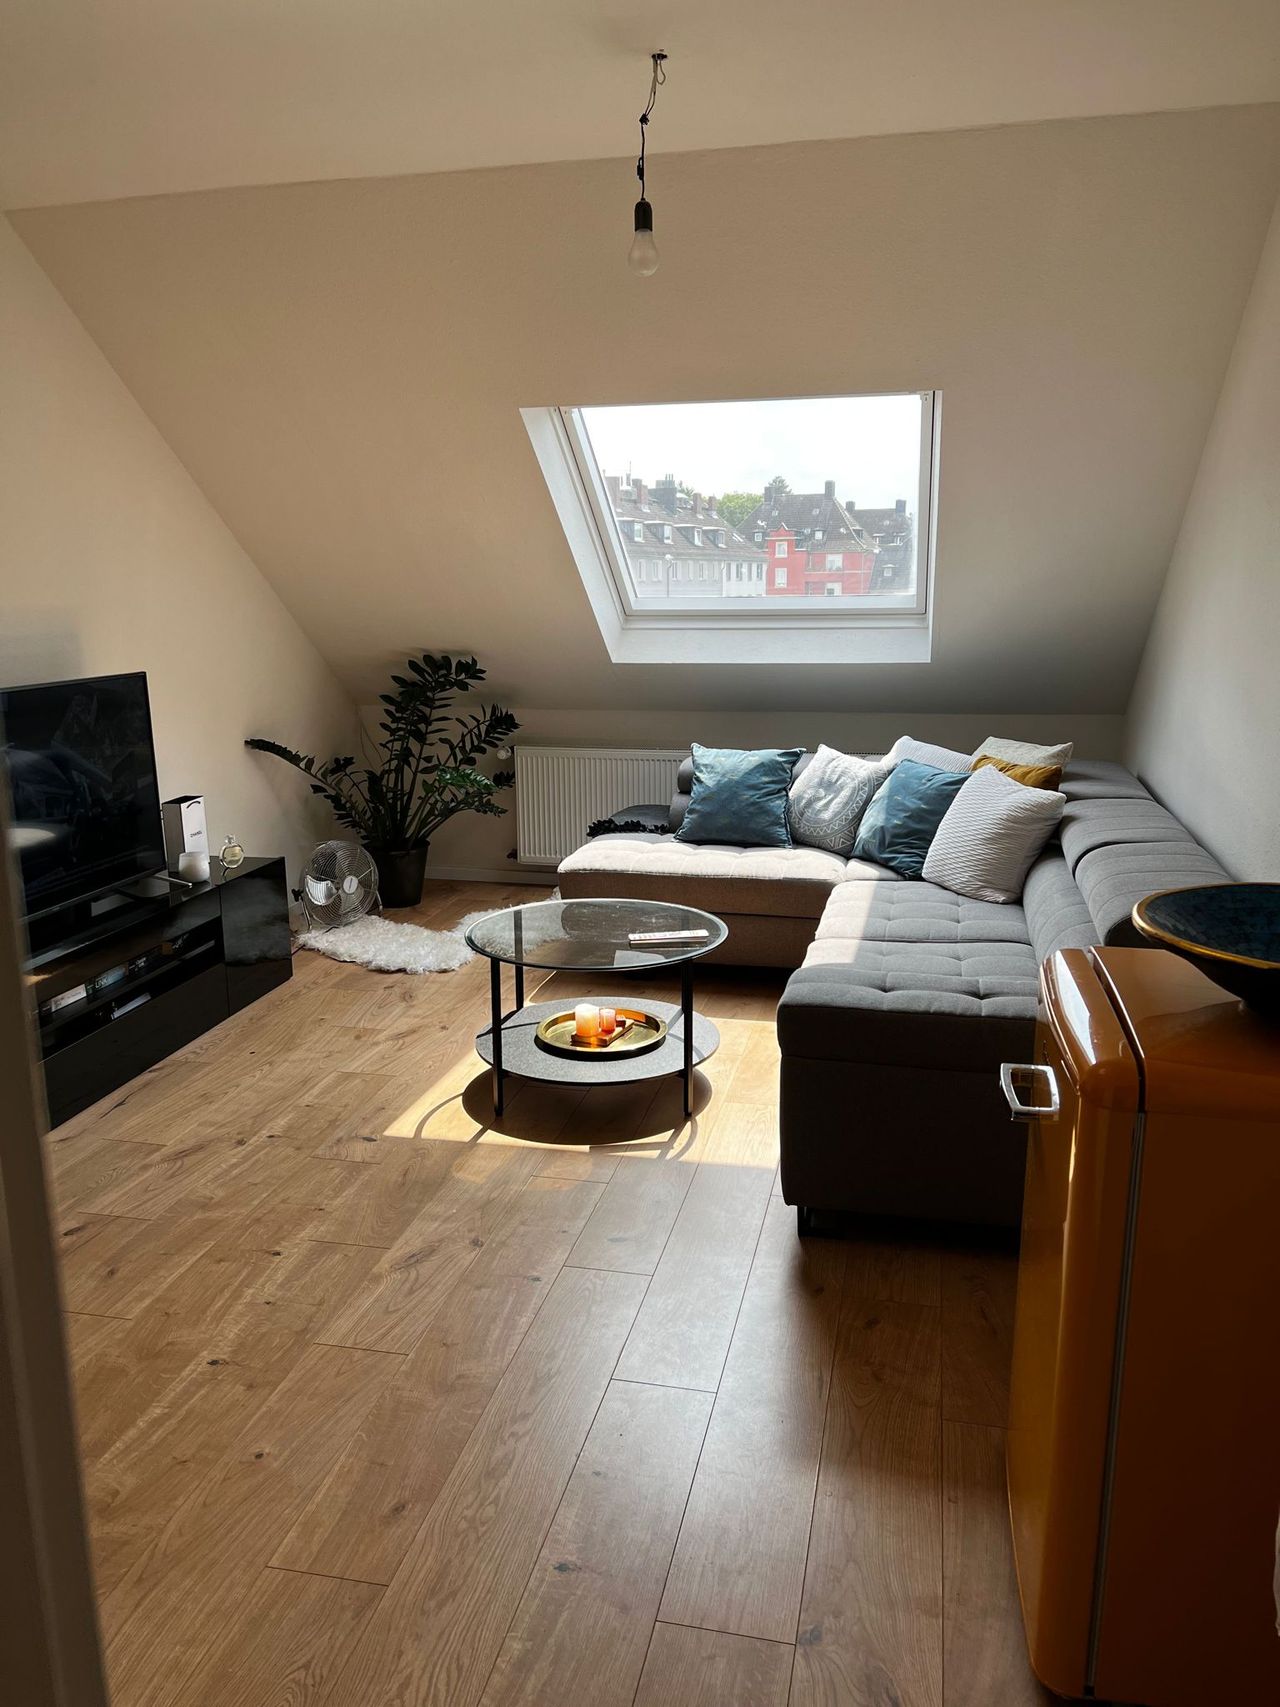 "Centrally Located Penthouse Apartment in Aachen - Your New Home Awaits!"